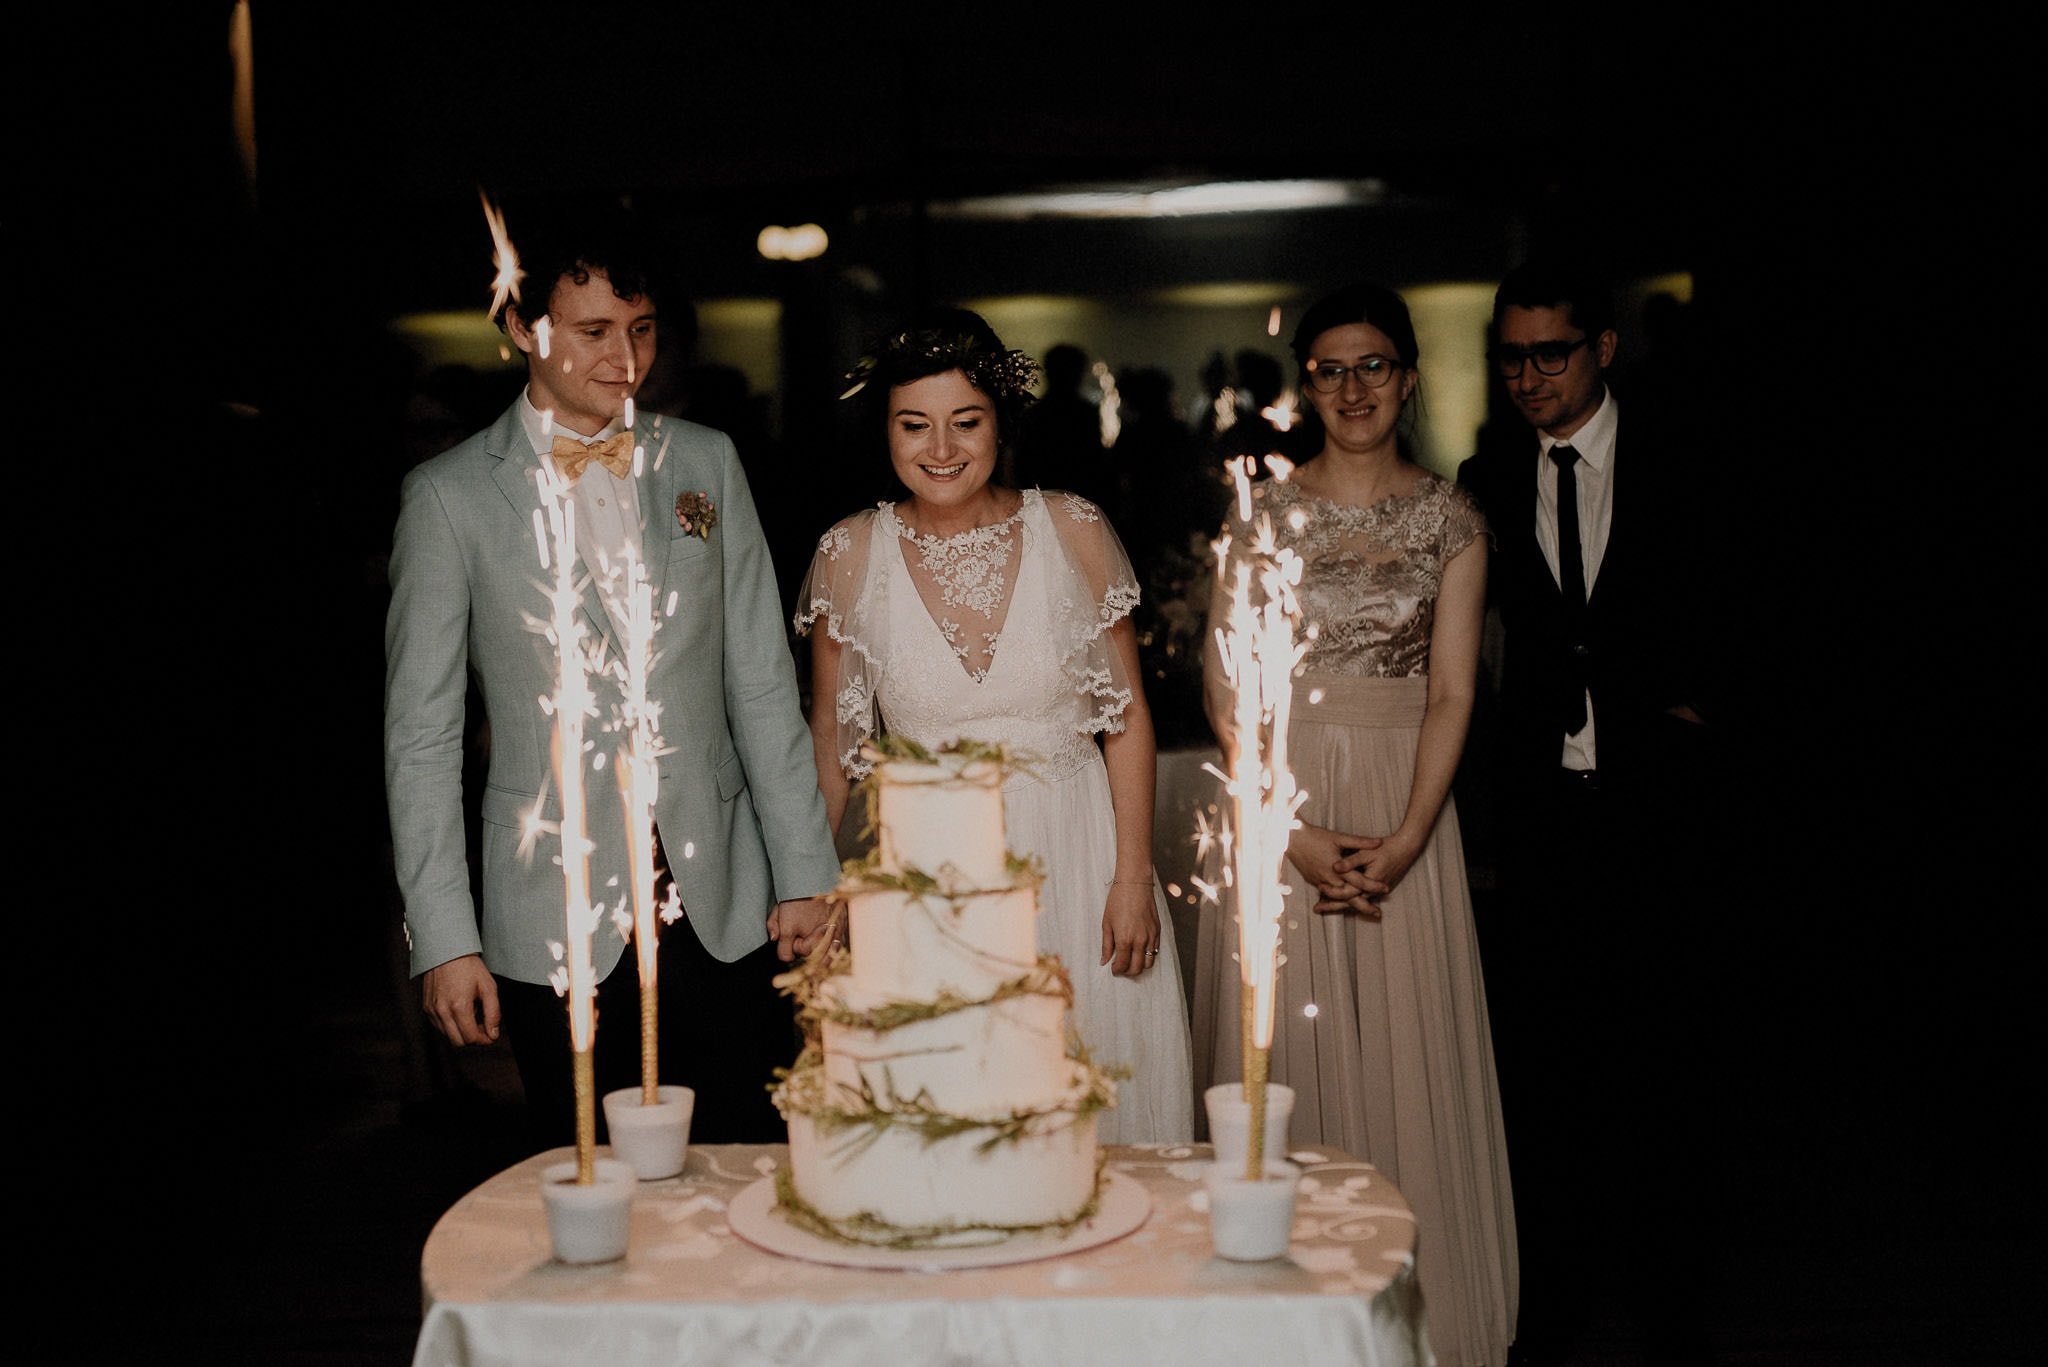 colourful wedding cake with sparkles brings happiness to the married couple